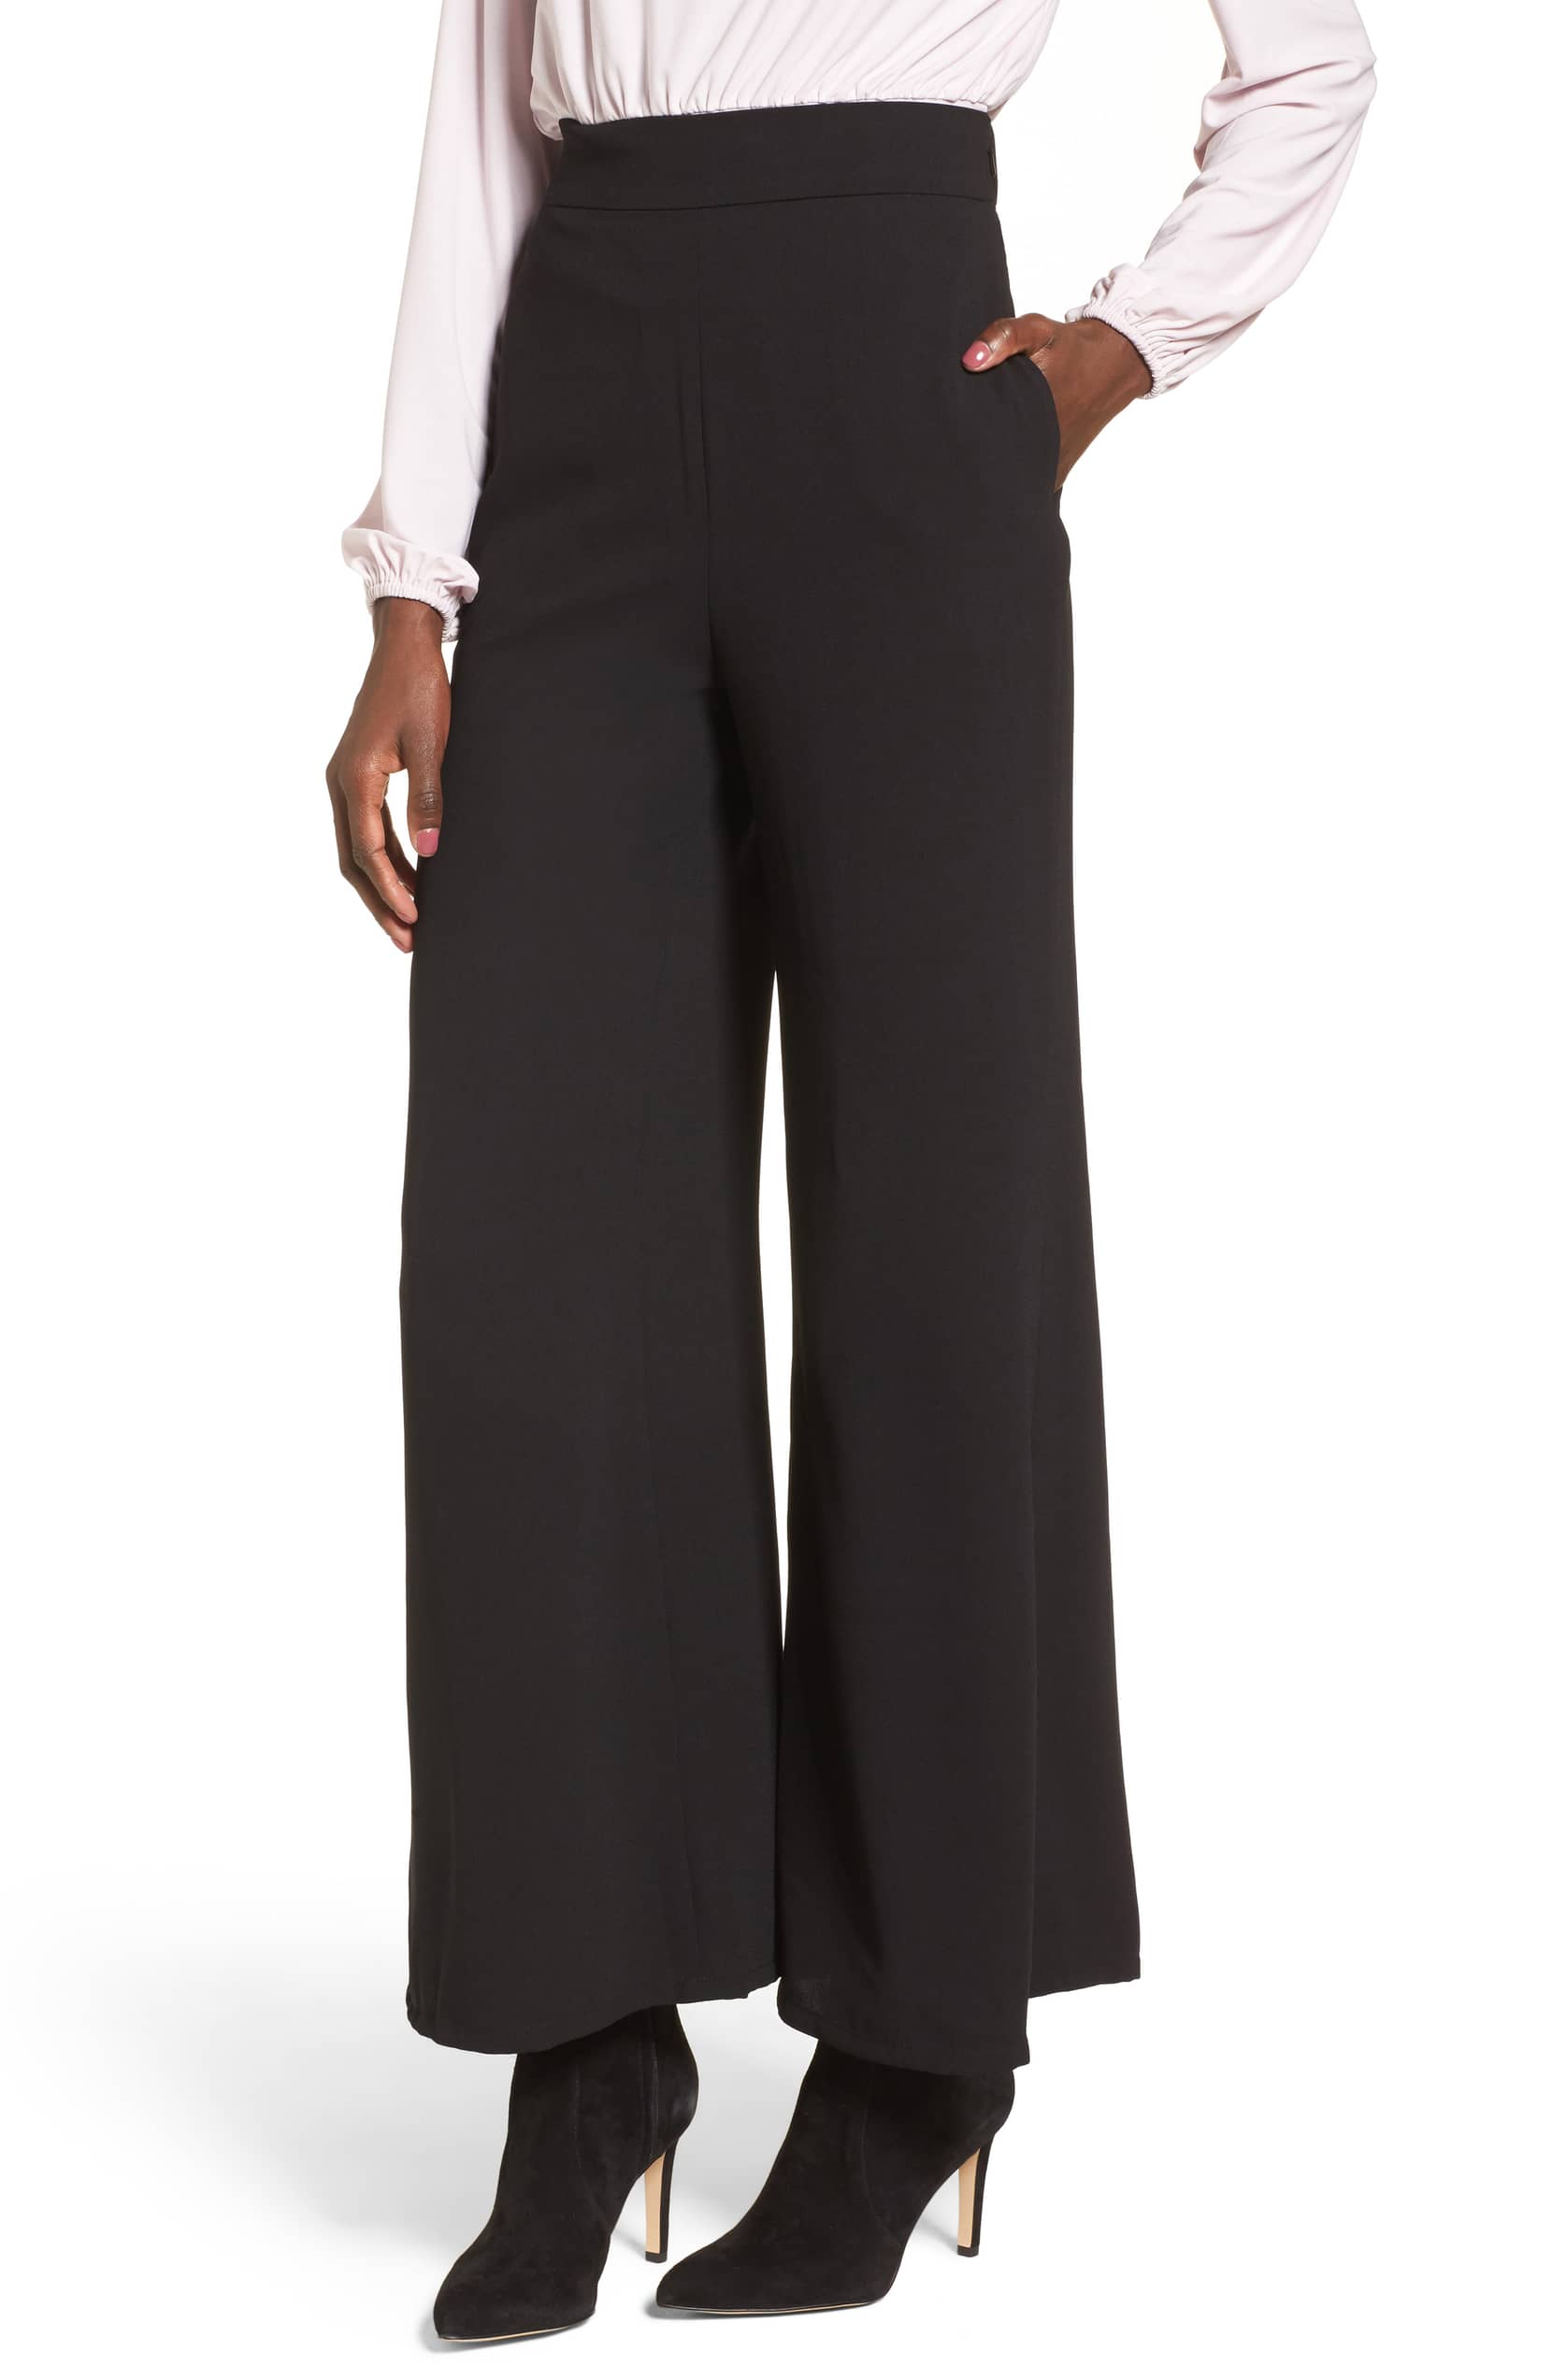 Wide-Leg Pants to Wear During Transitional Weather